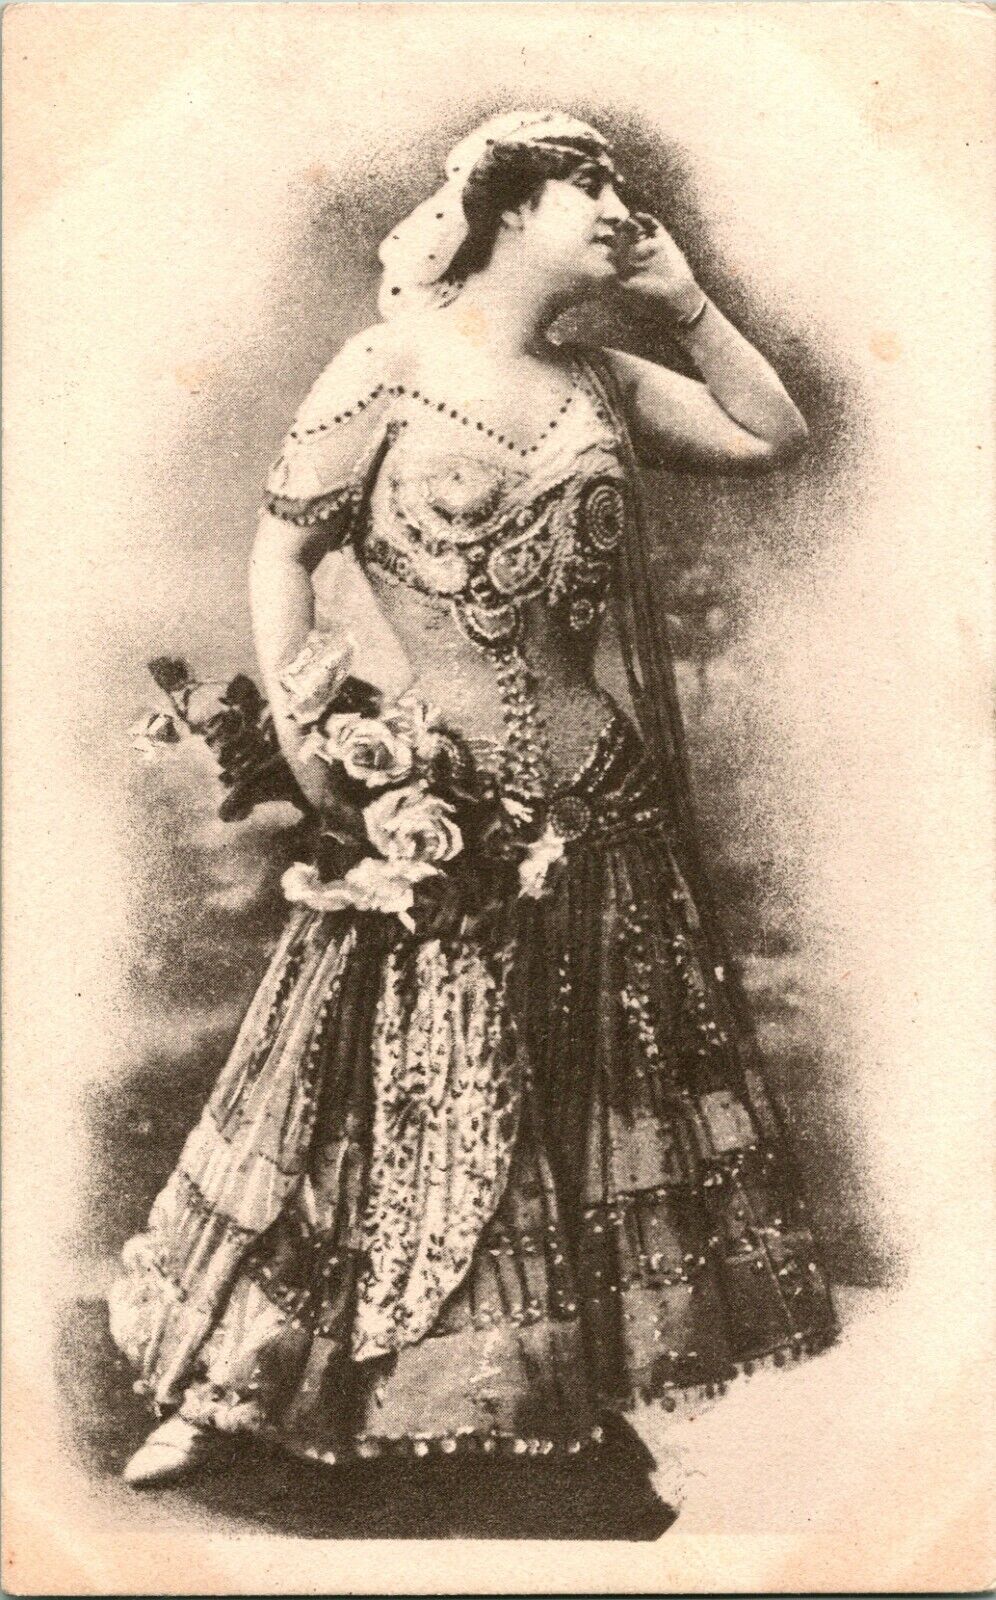 Vtg Postcard c 1910 - Woman (?) In Exoxic Dress and Flower Bouquet